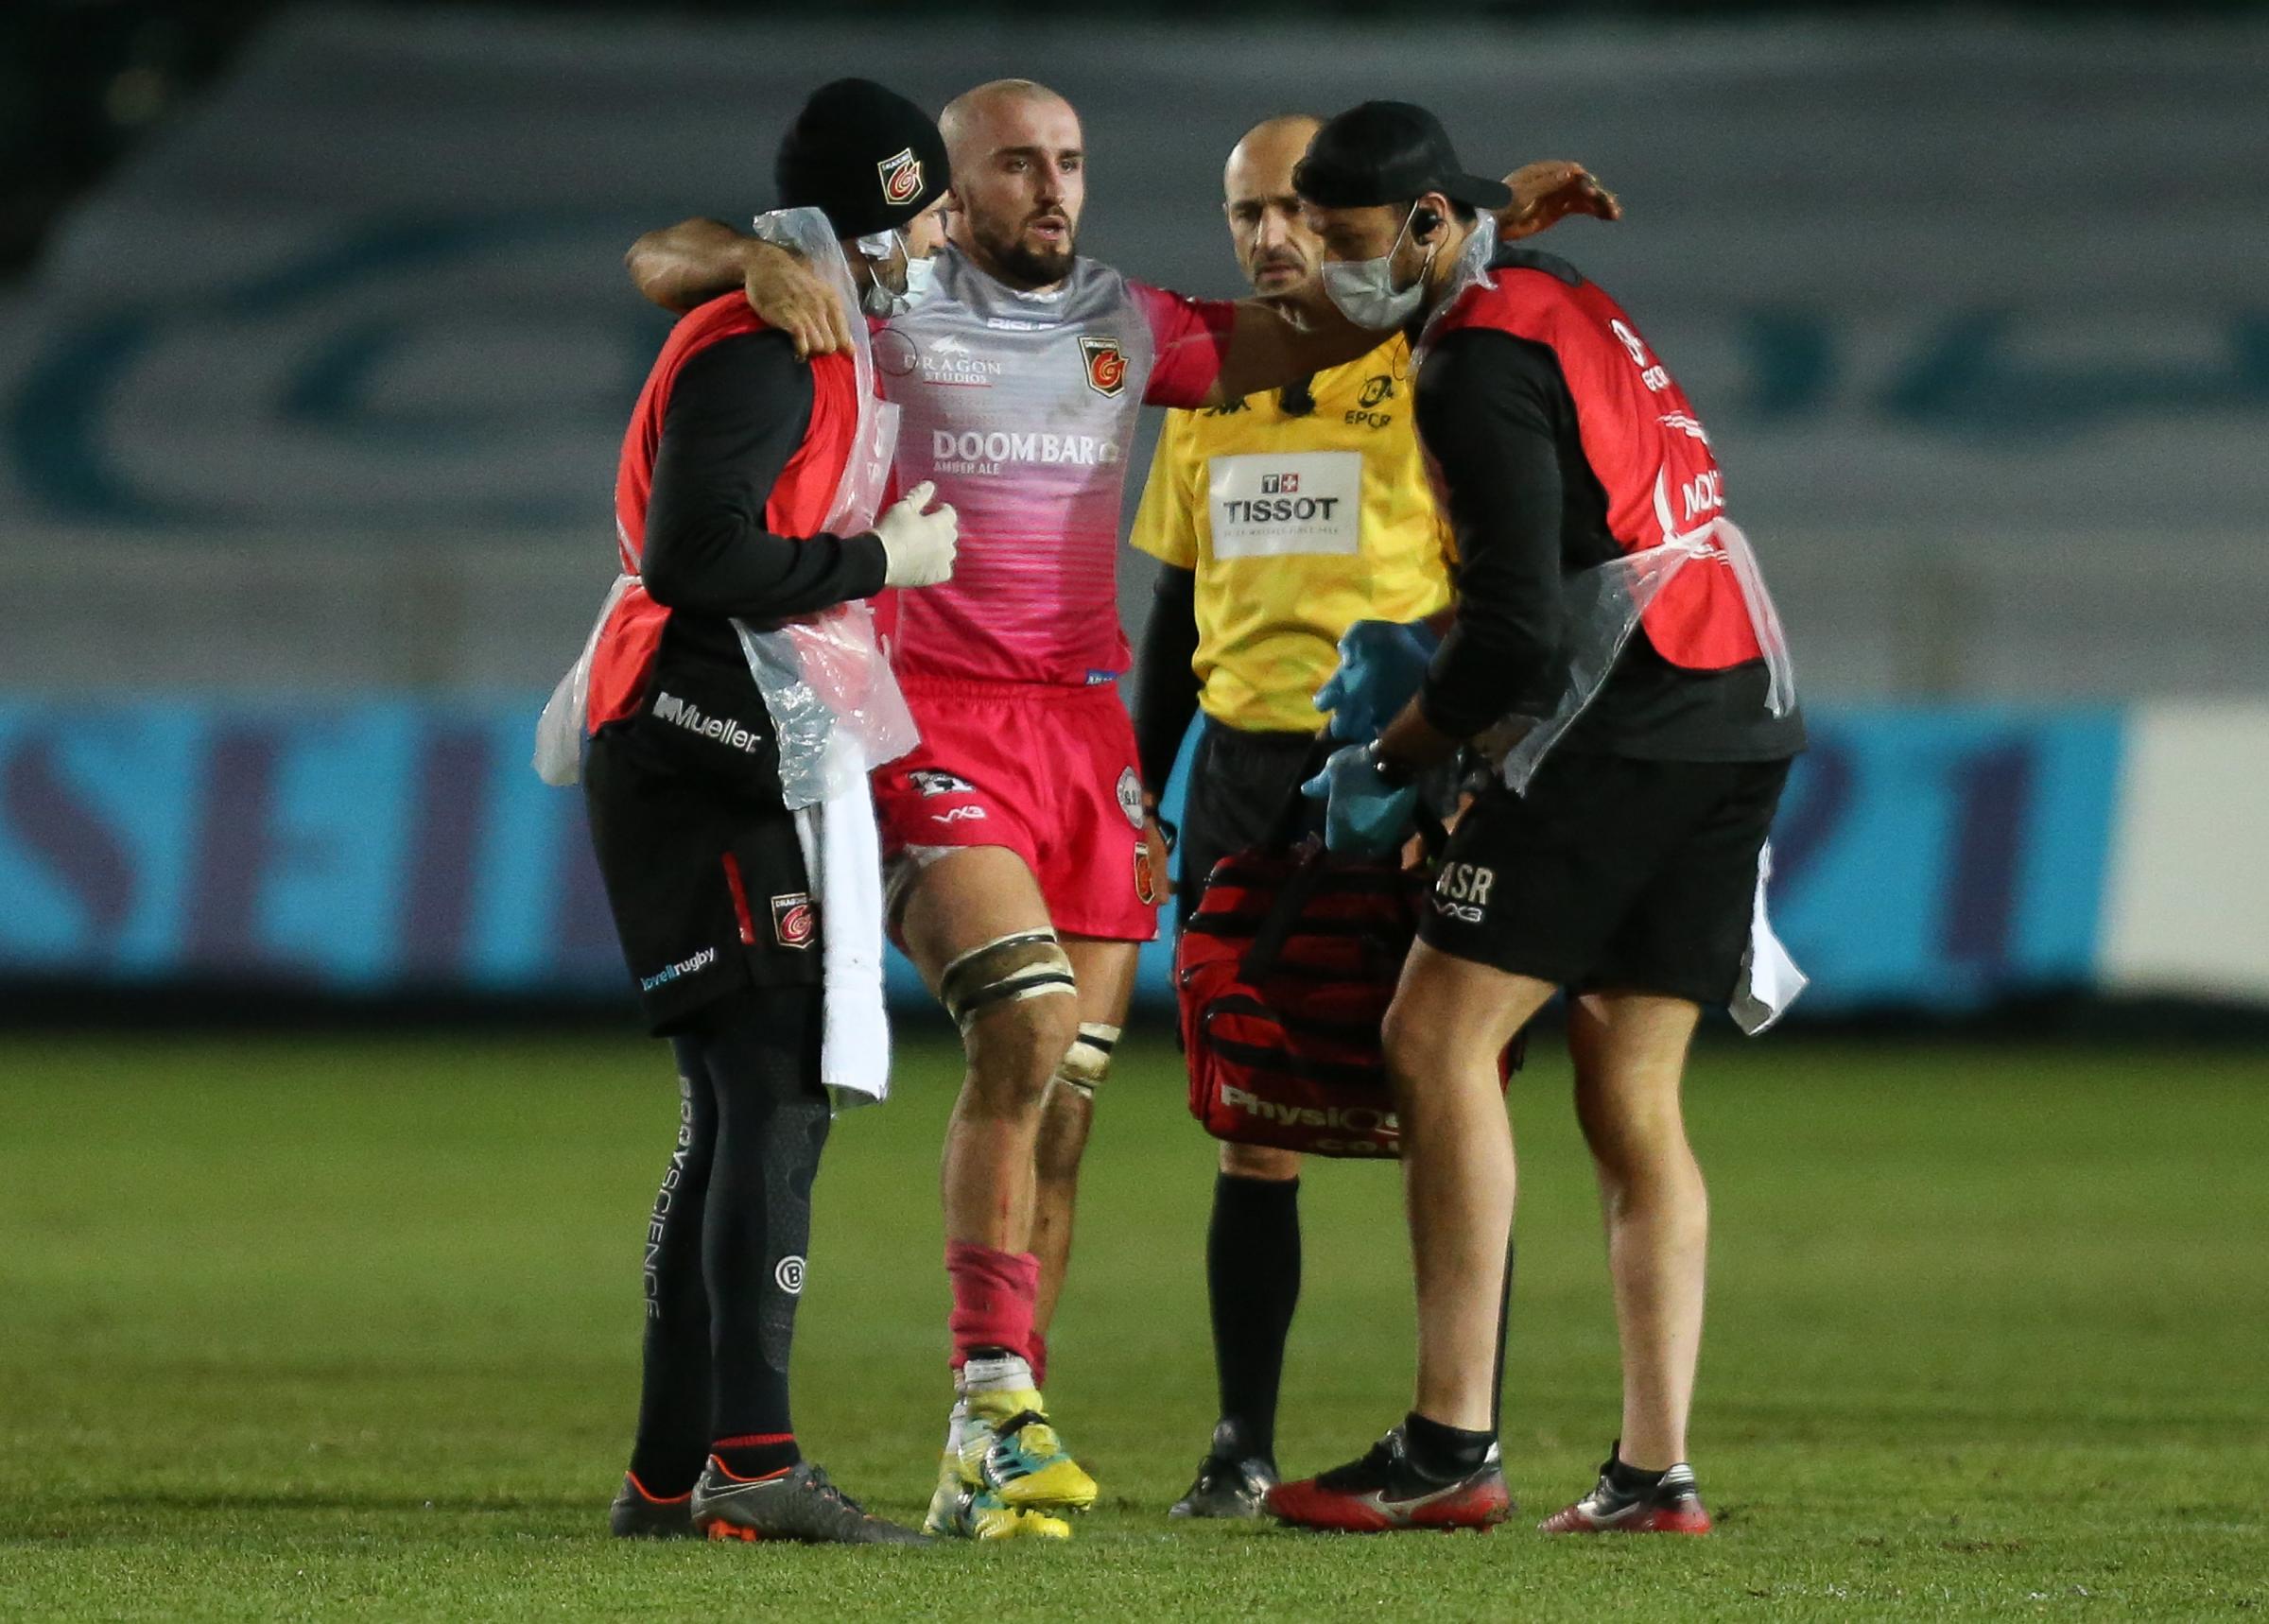 UNLUCKY: Ollie Griffiths is helped from the field against Wasps